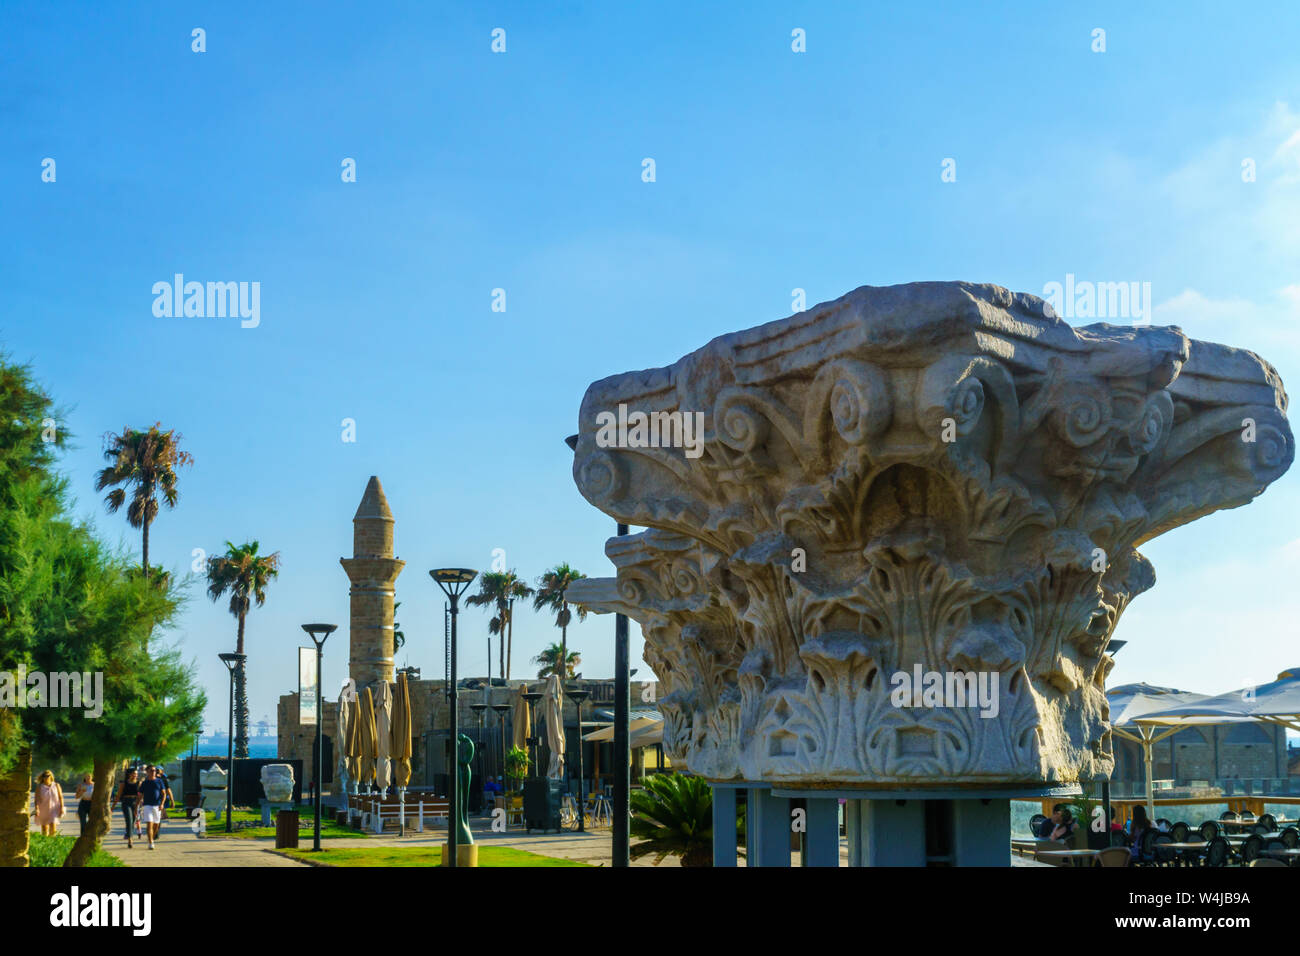 Caesarea, Israel - July 22, 2019: View of a Roma era column capital, and the Bosnian mosque, with visitors, in Caesarea National Park, Northern Israel Stock Photo